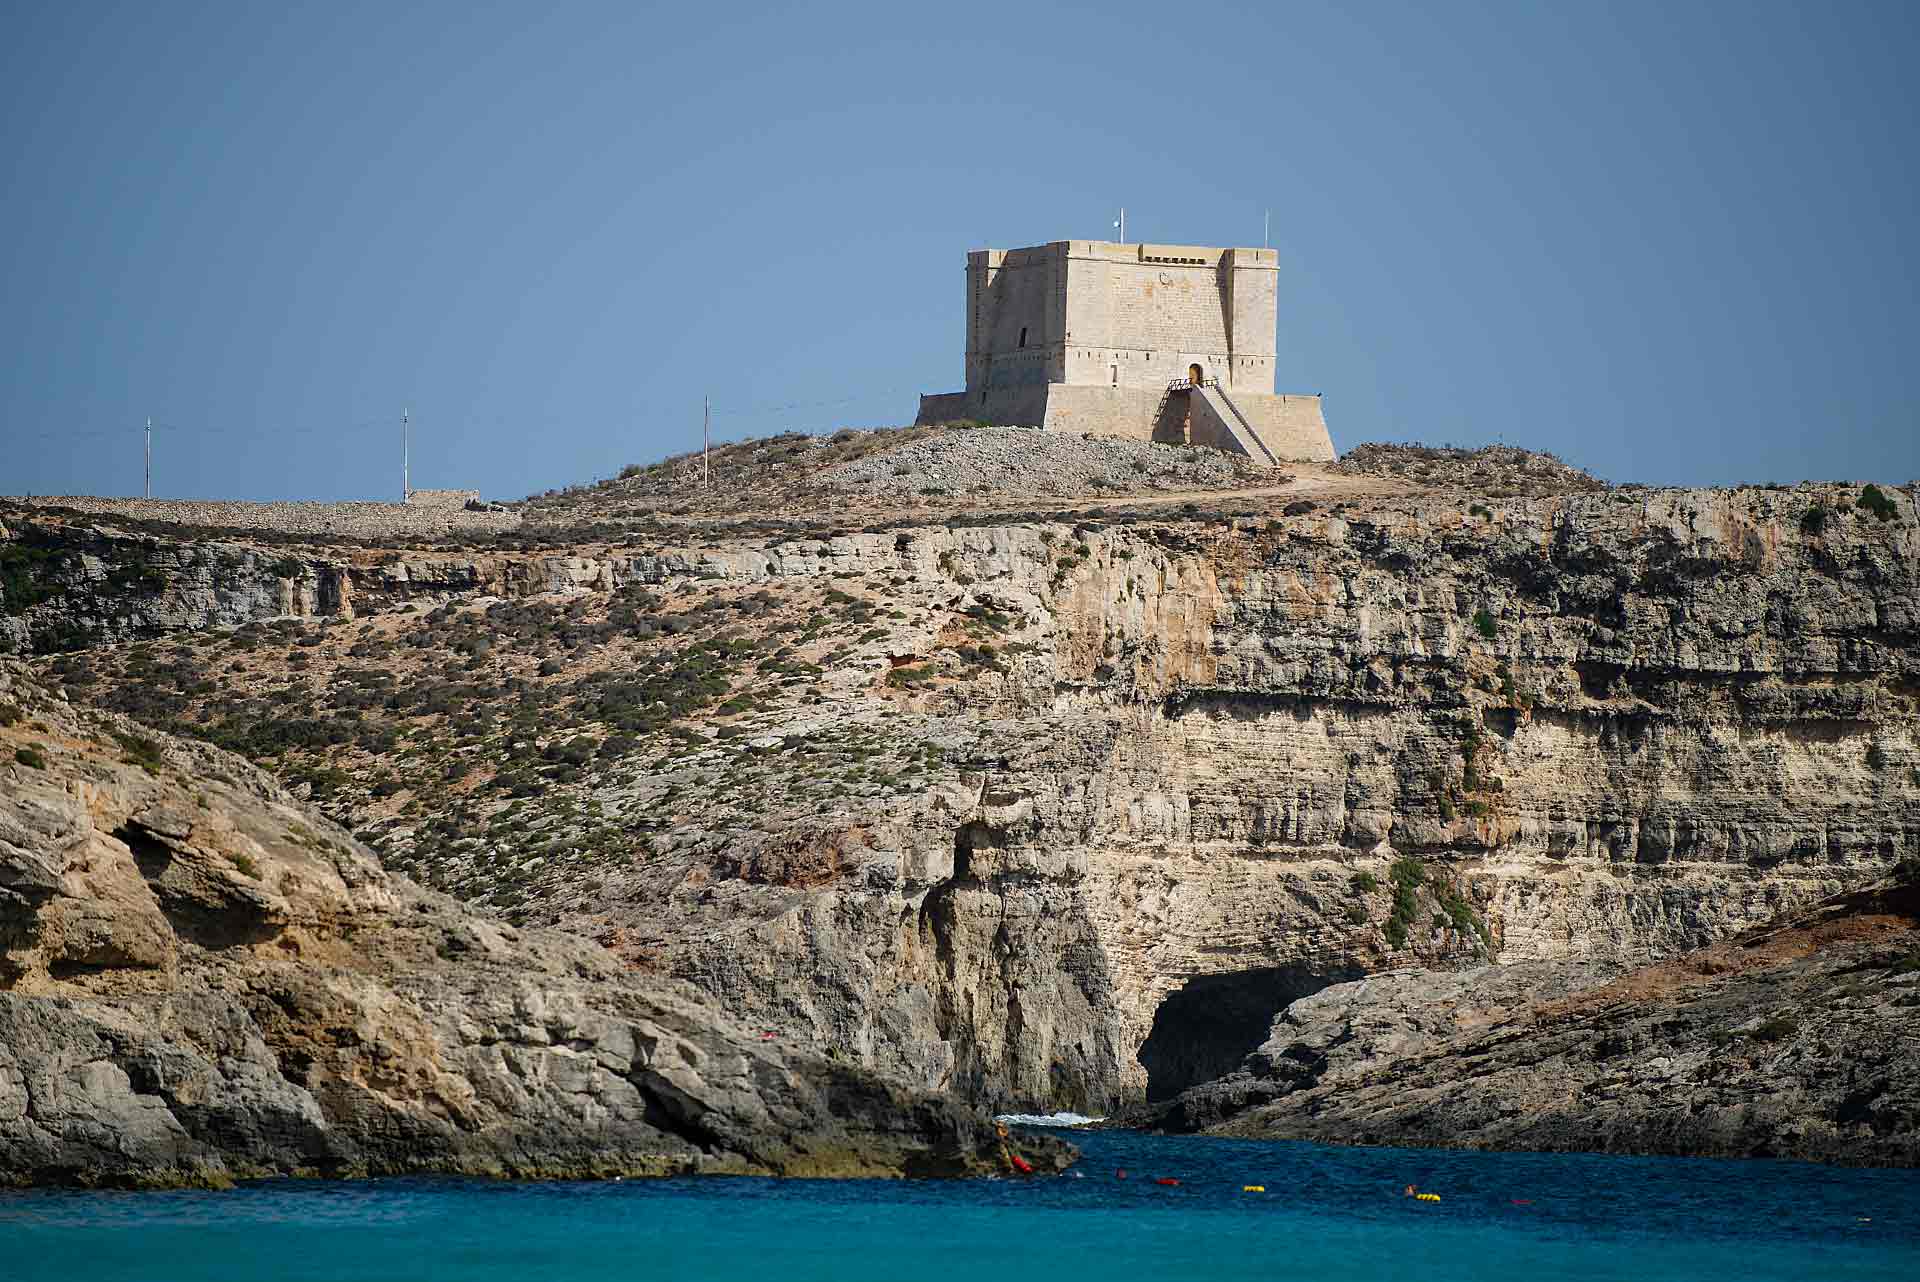 St Mary's Tower in Comino.